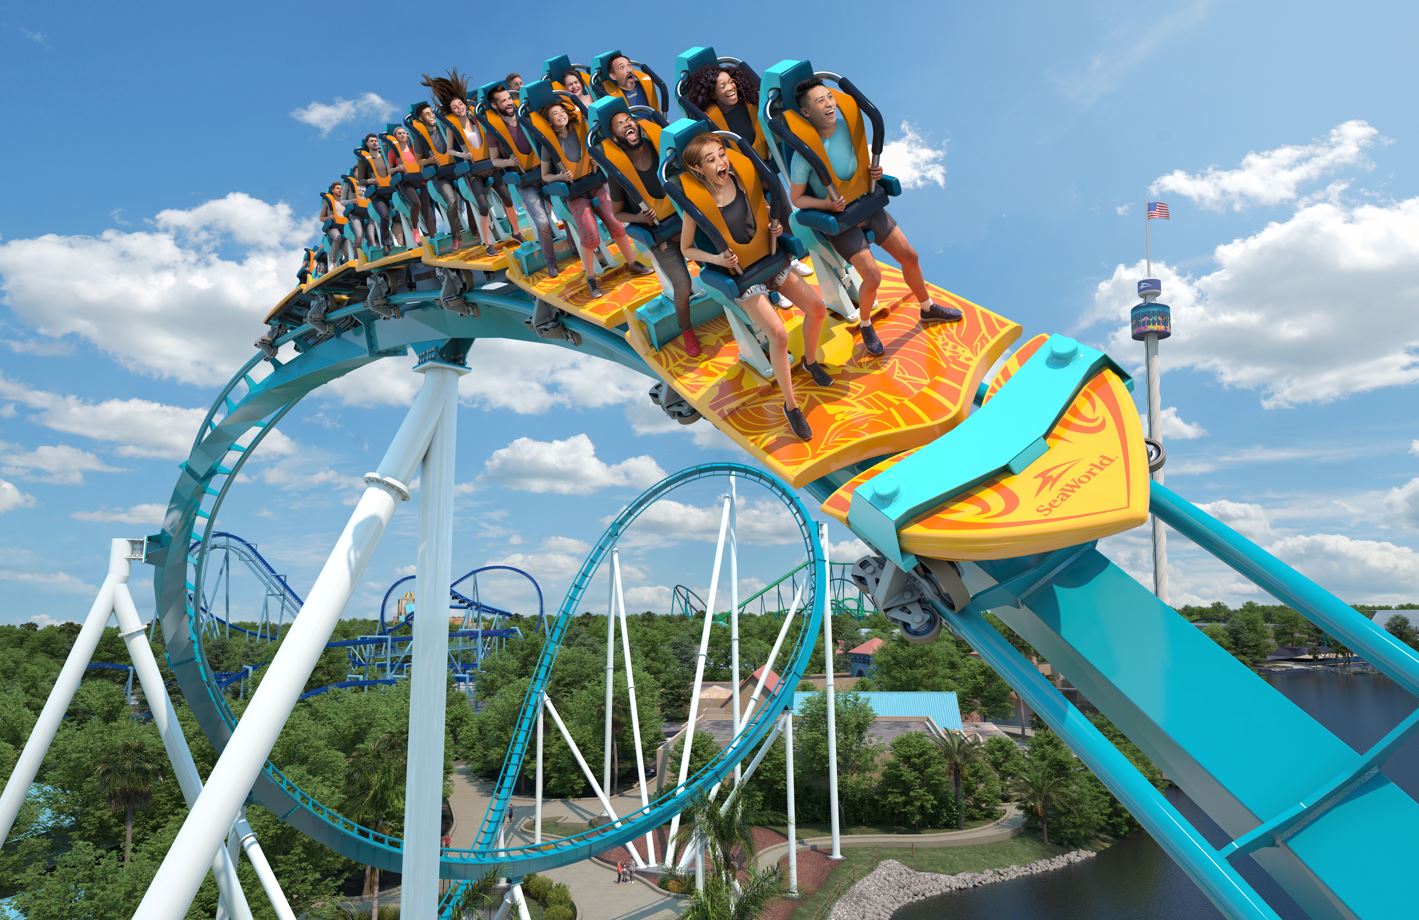 Pipeline The Surf Coaster will be opening at SeaWorld in spring 2023